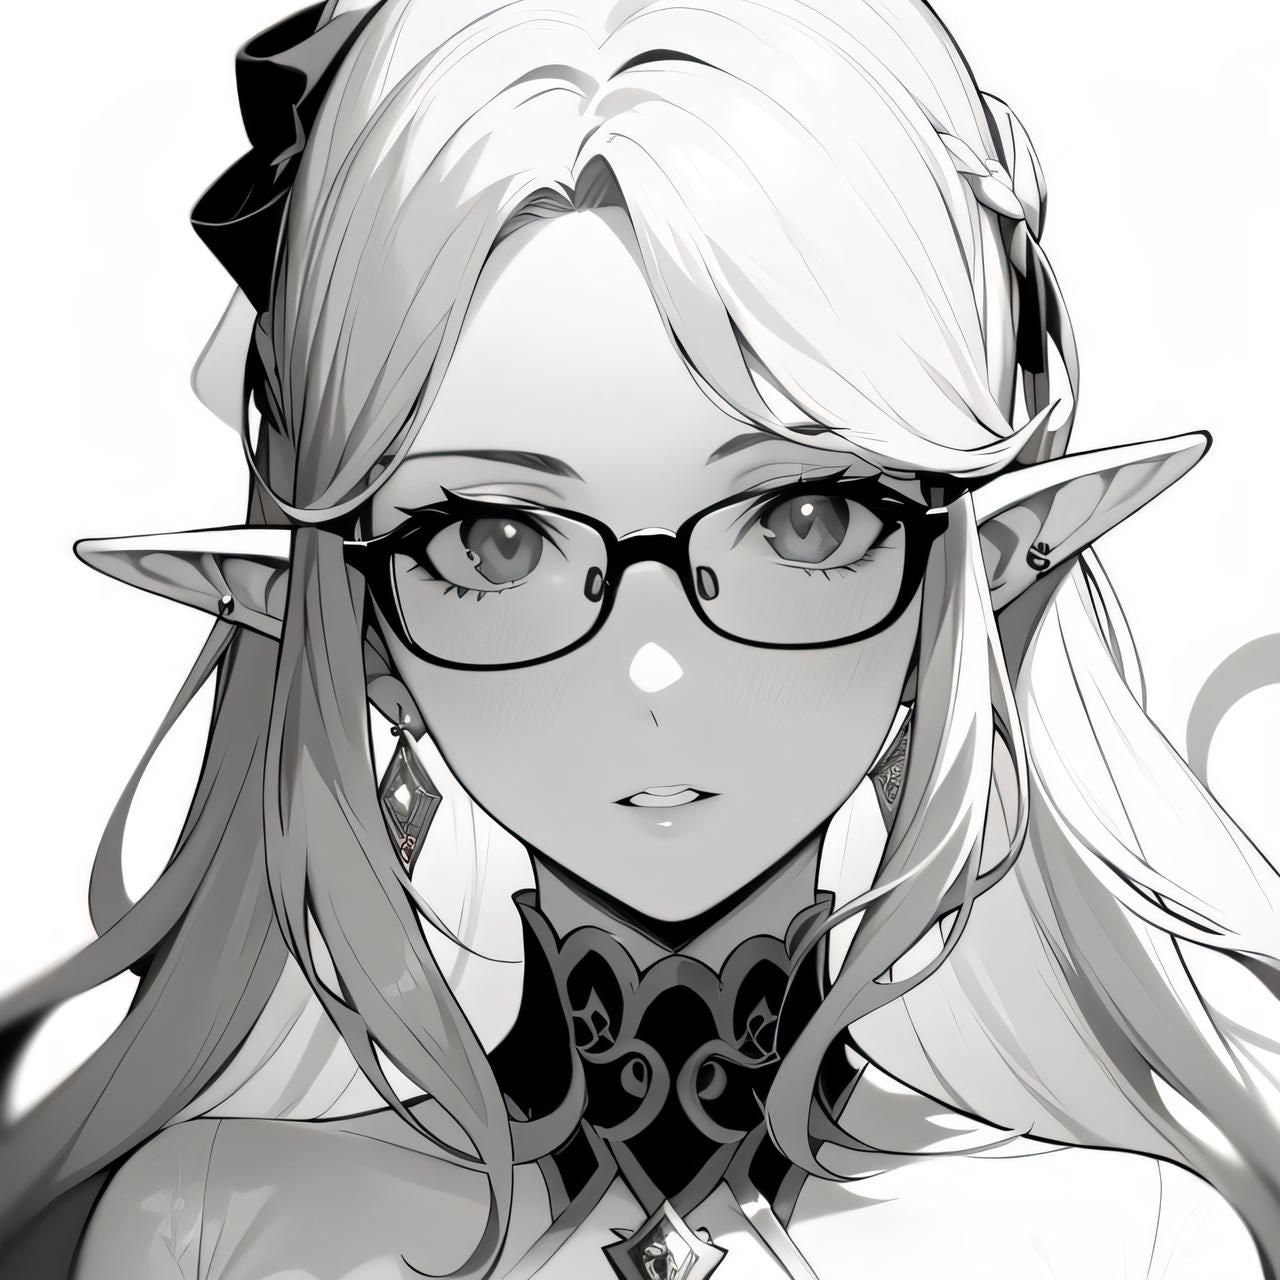 Draw a cool black and white anime manga style by Keroblack  Fiverr